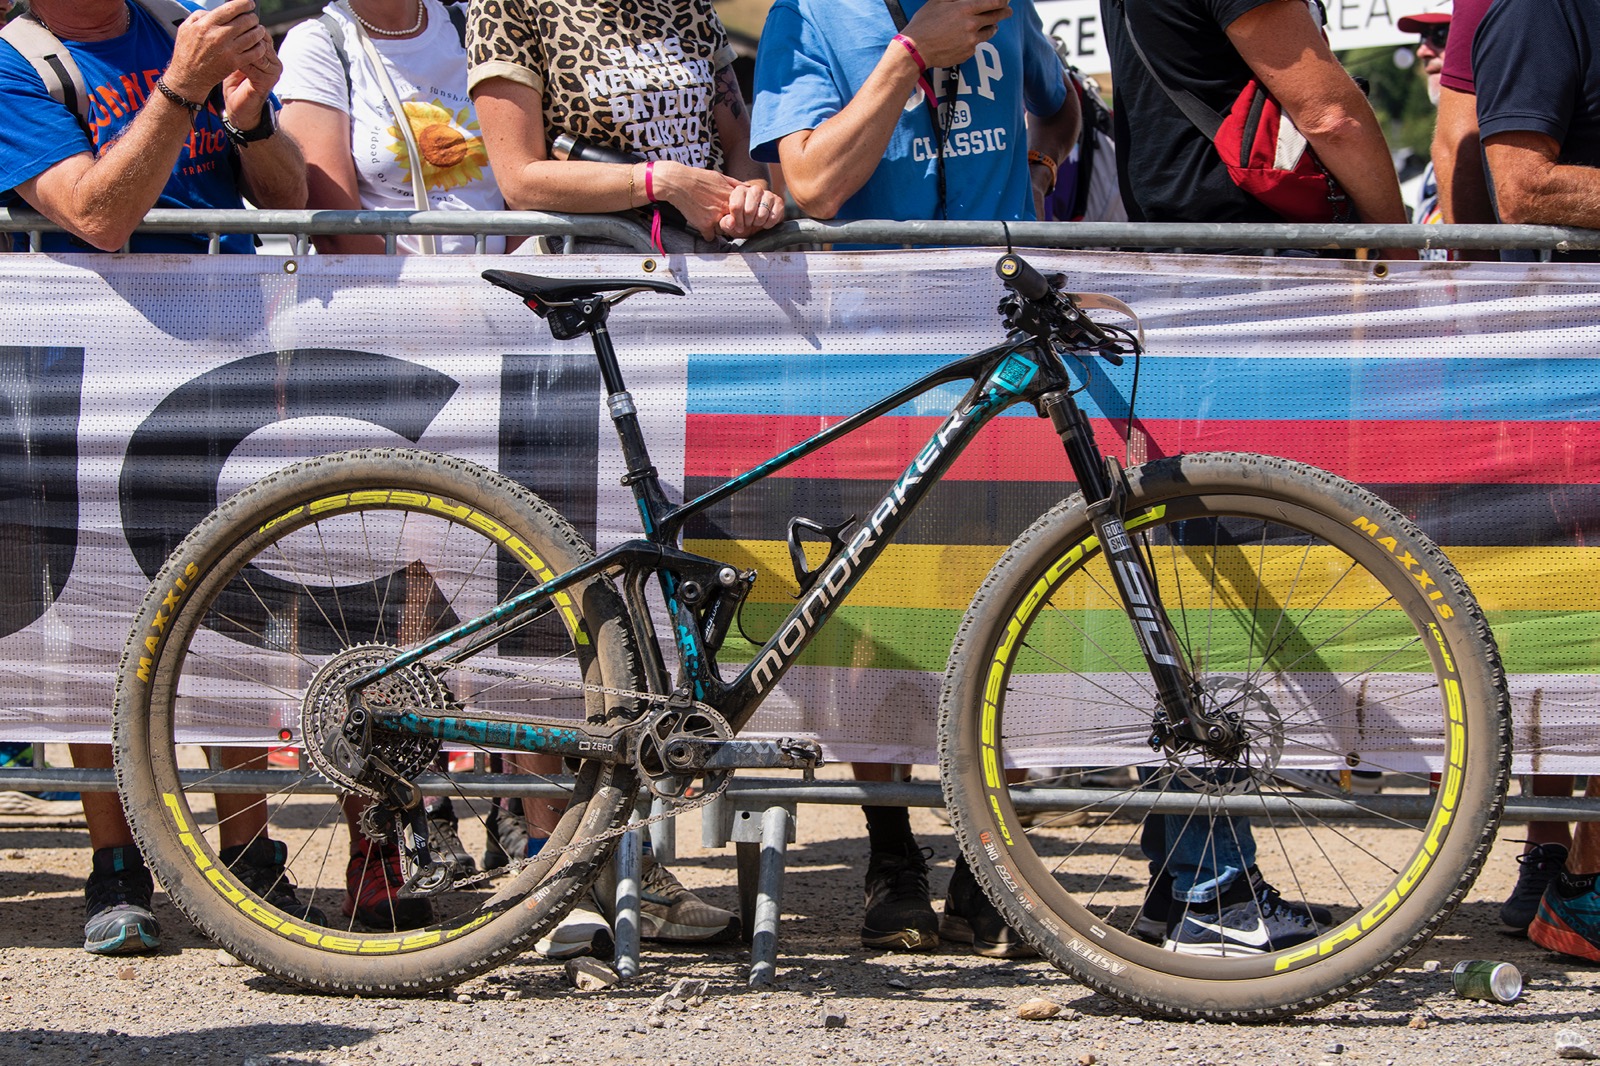 All the action from the XCO World Champs